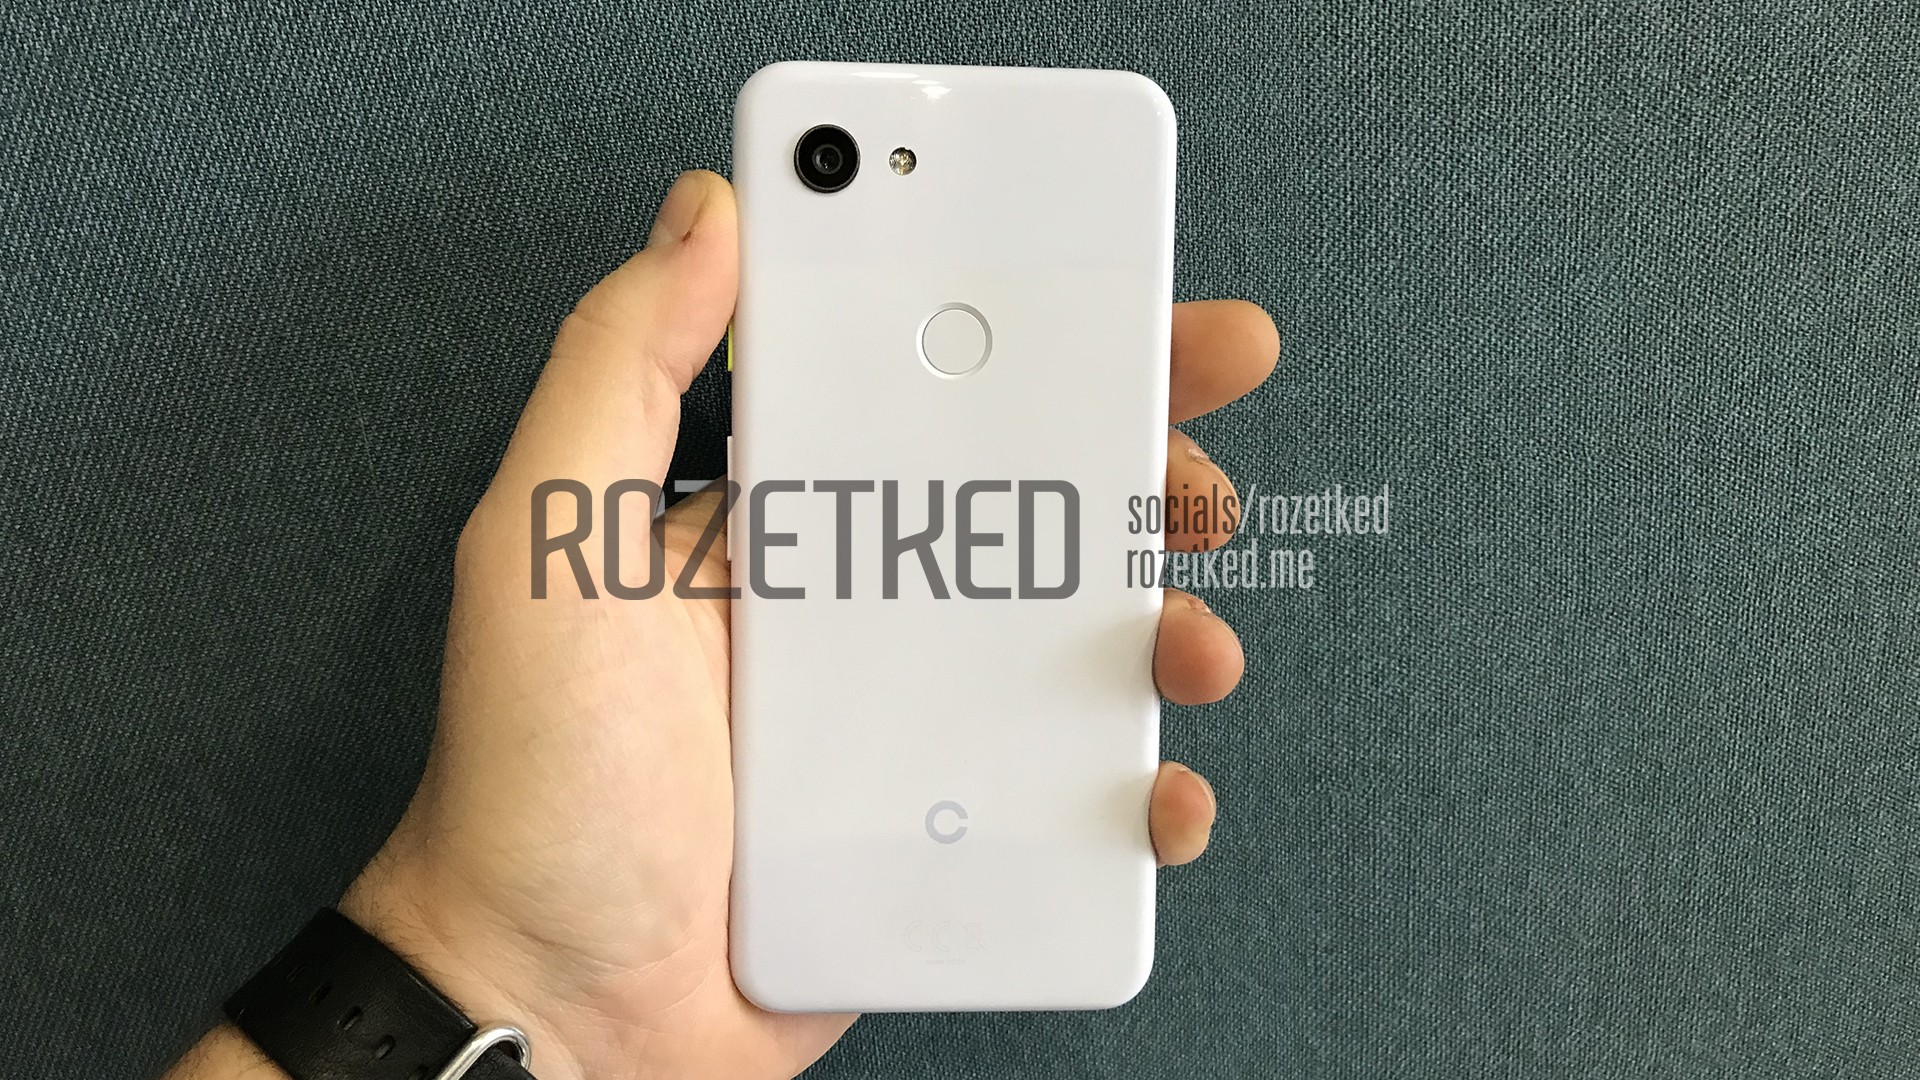 Sample Photos Leakes from the leaked Pixel 3 Lite 10